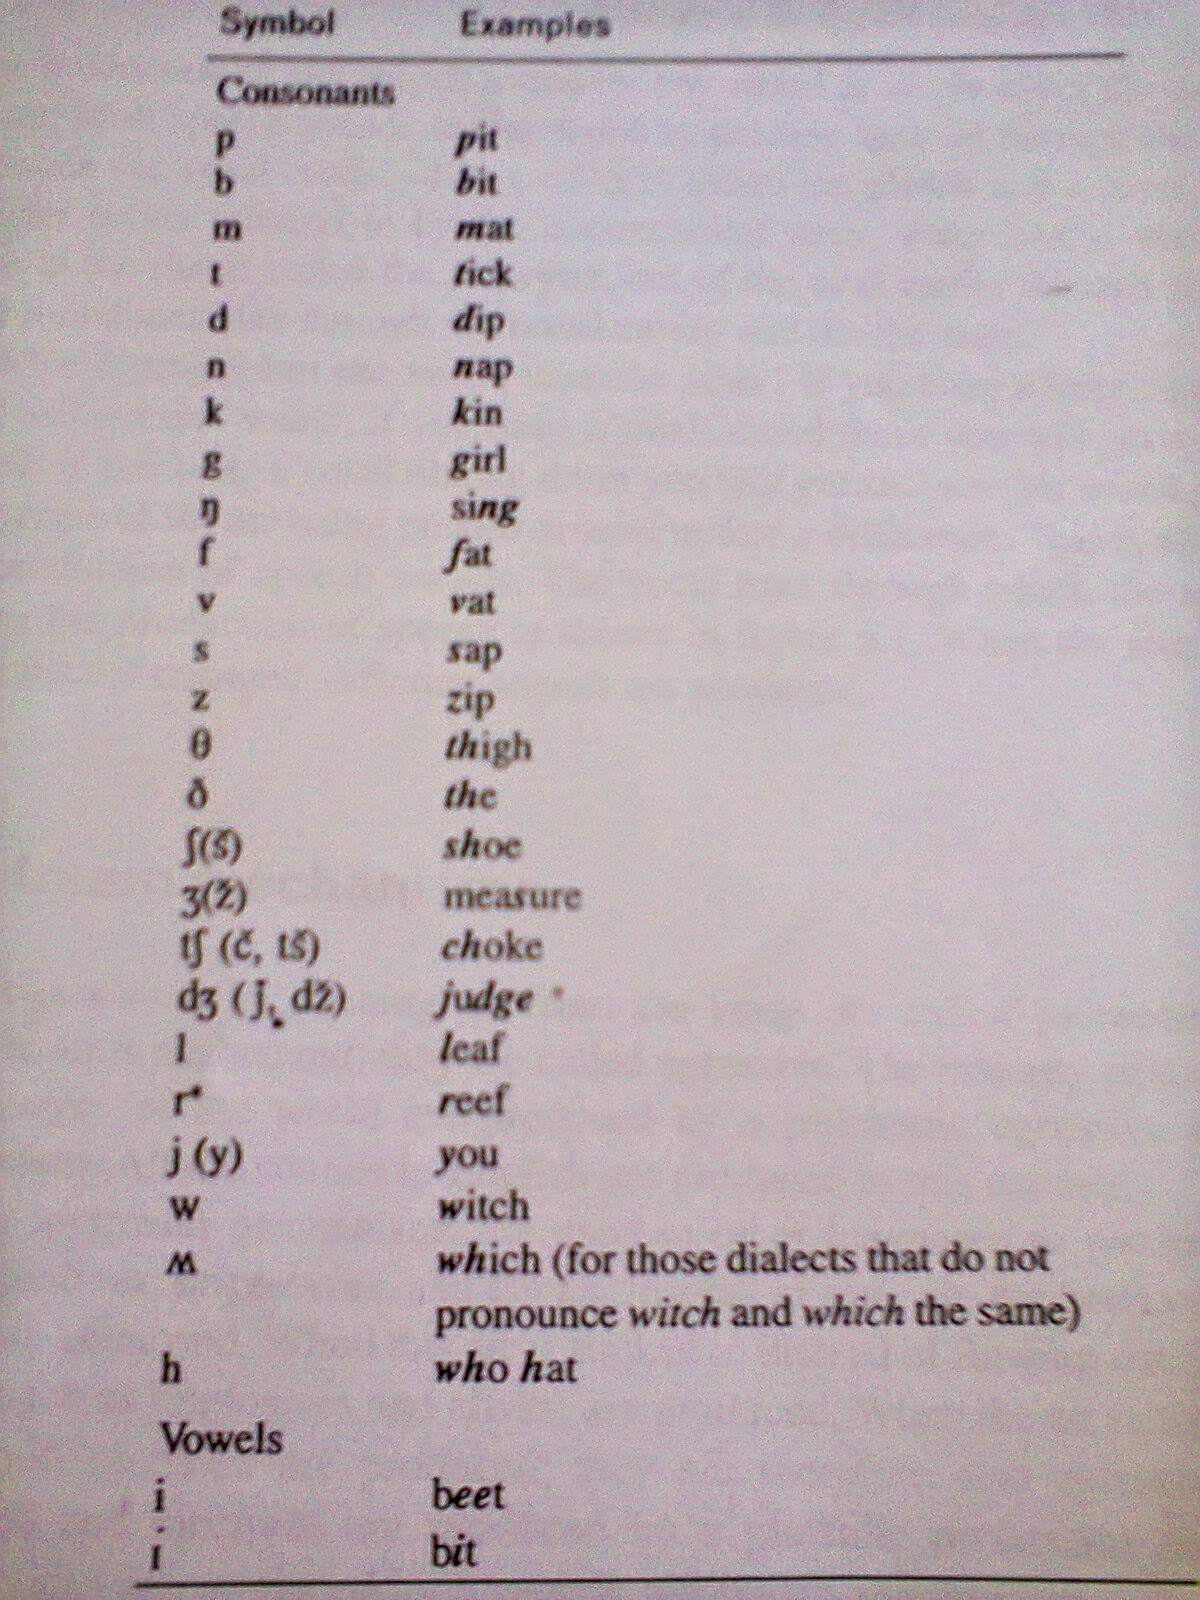 In The Phonetic Alphabet Help Would Be Spelt Using / 45 Sounds Pronunciation Studio